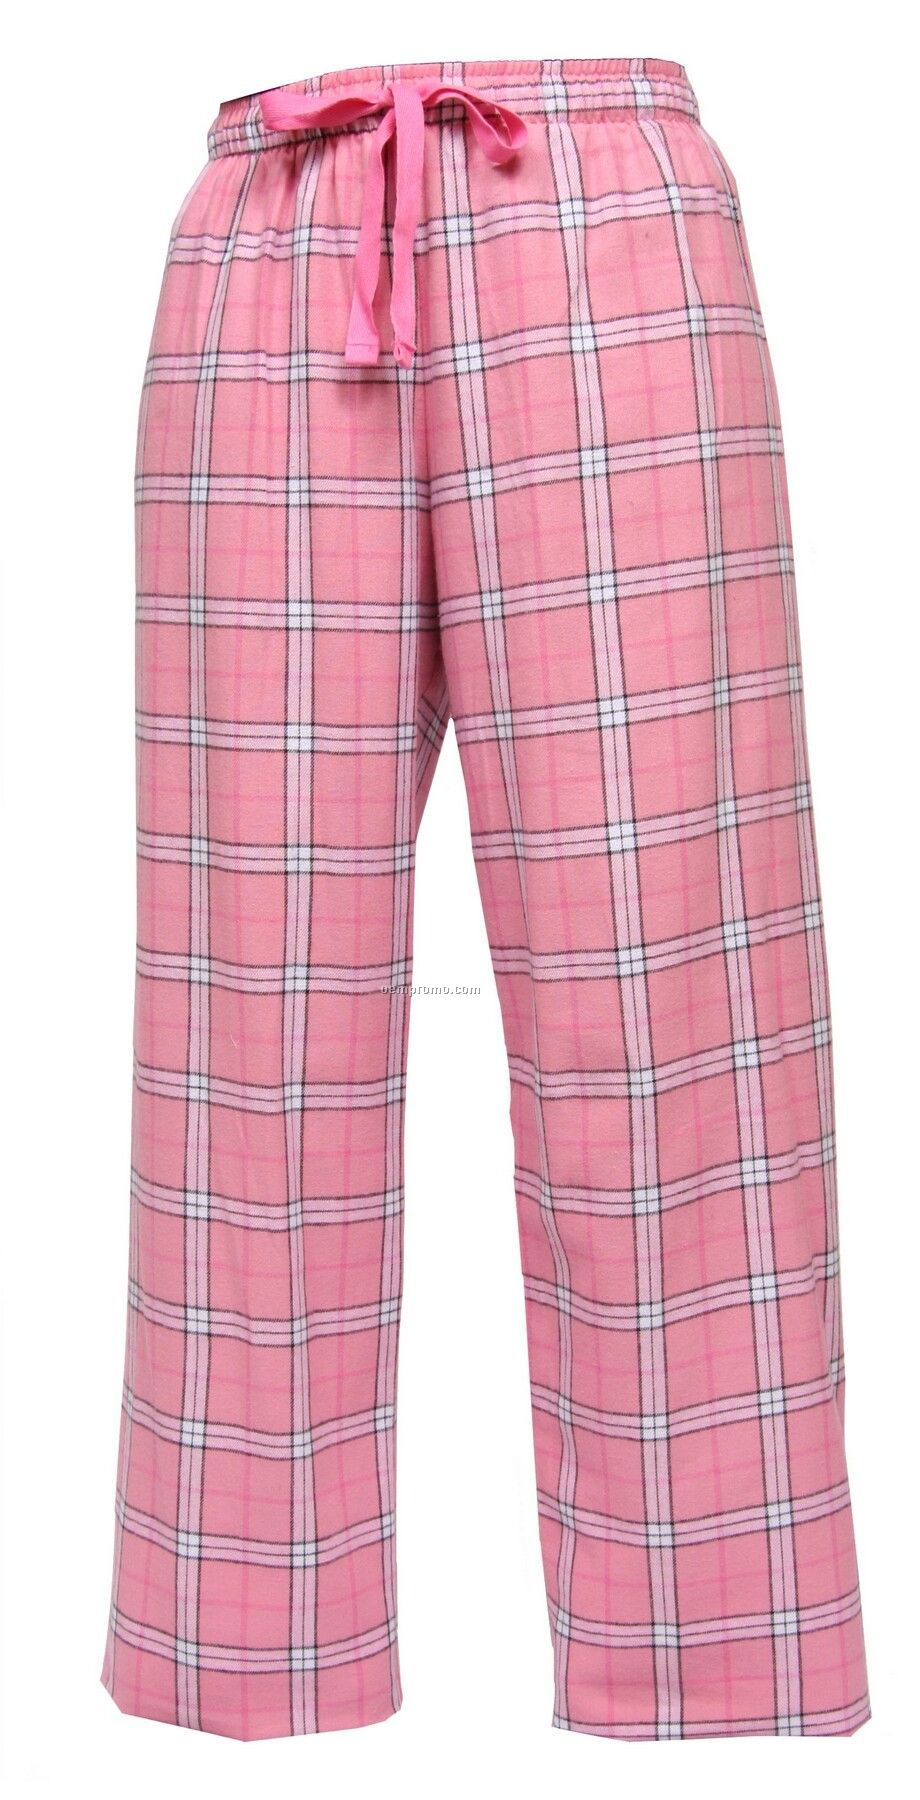 Youth Pink/Black Plaid Fashion Flannel Pant With Tie Cord